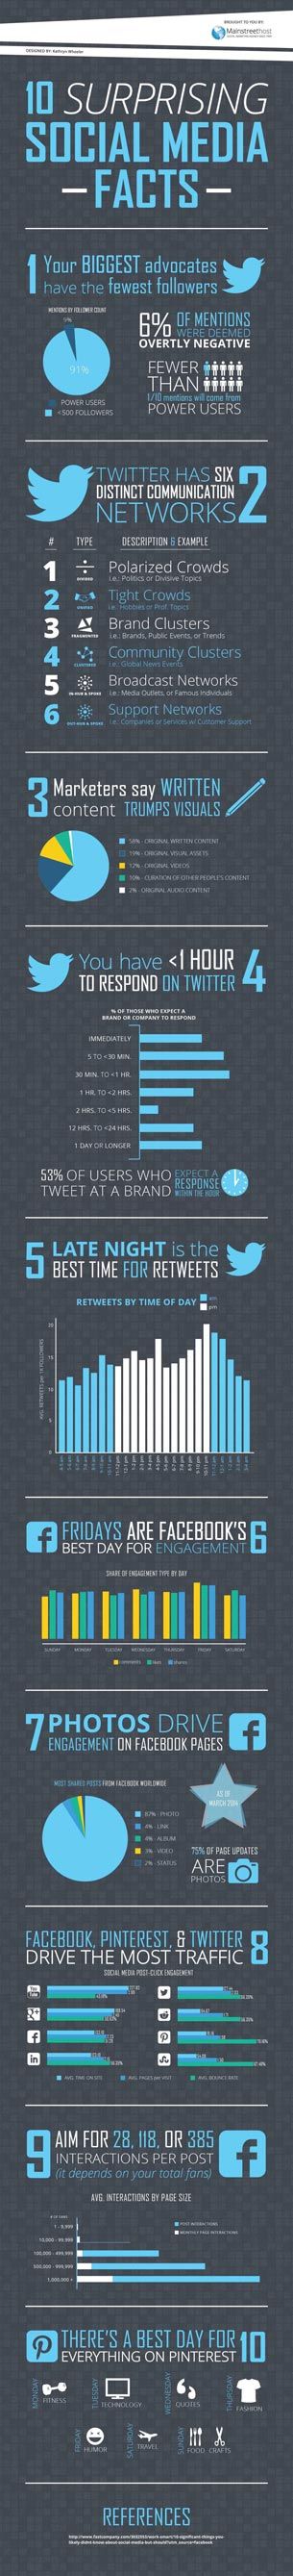 10 Surprising Social Media Facts Infographic